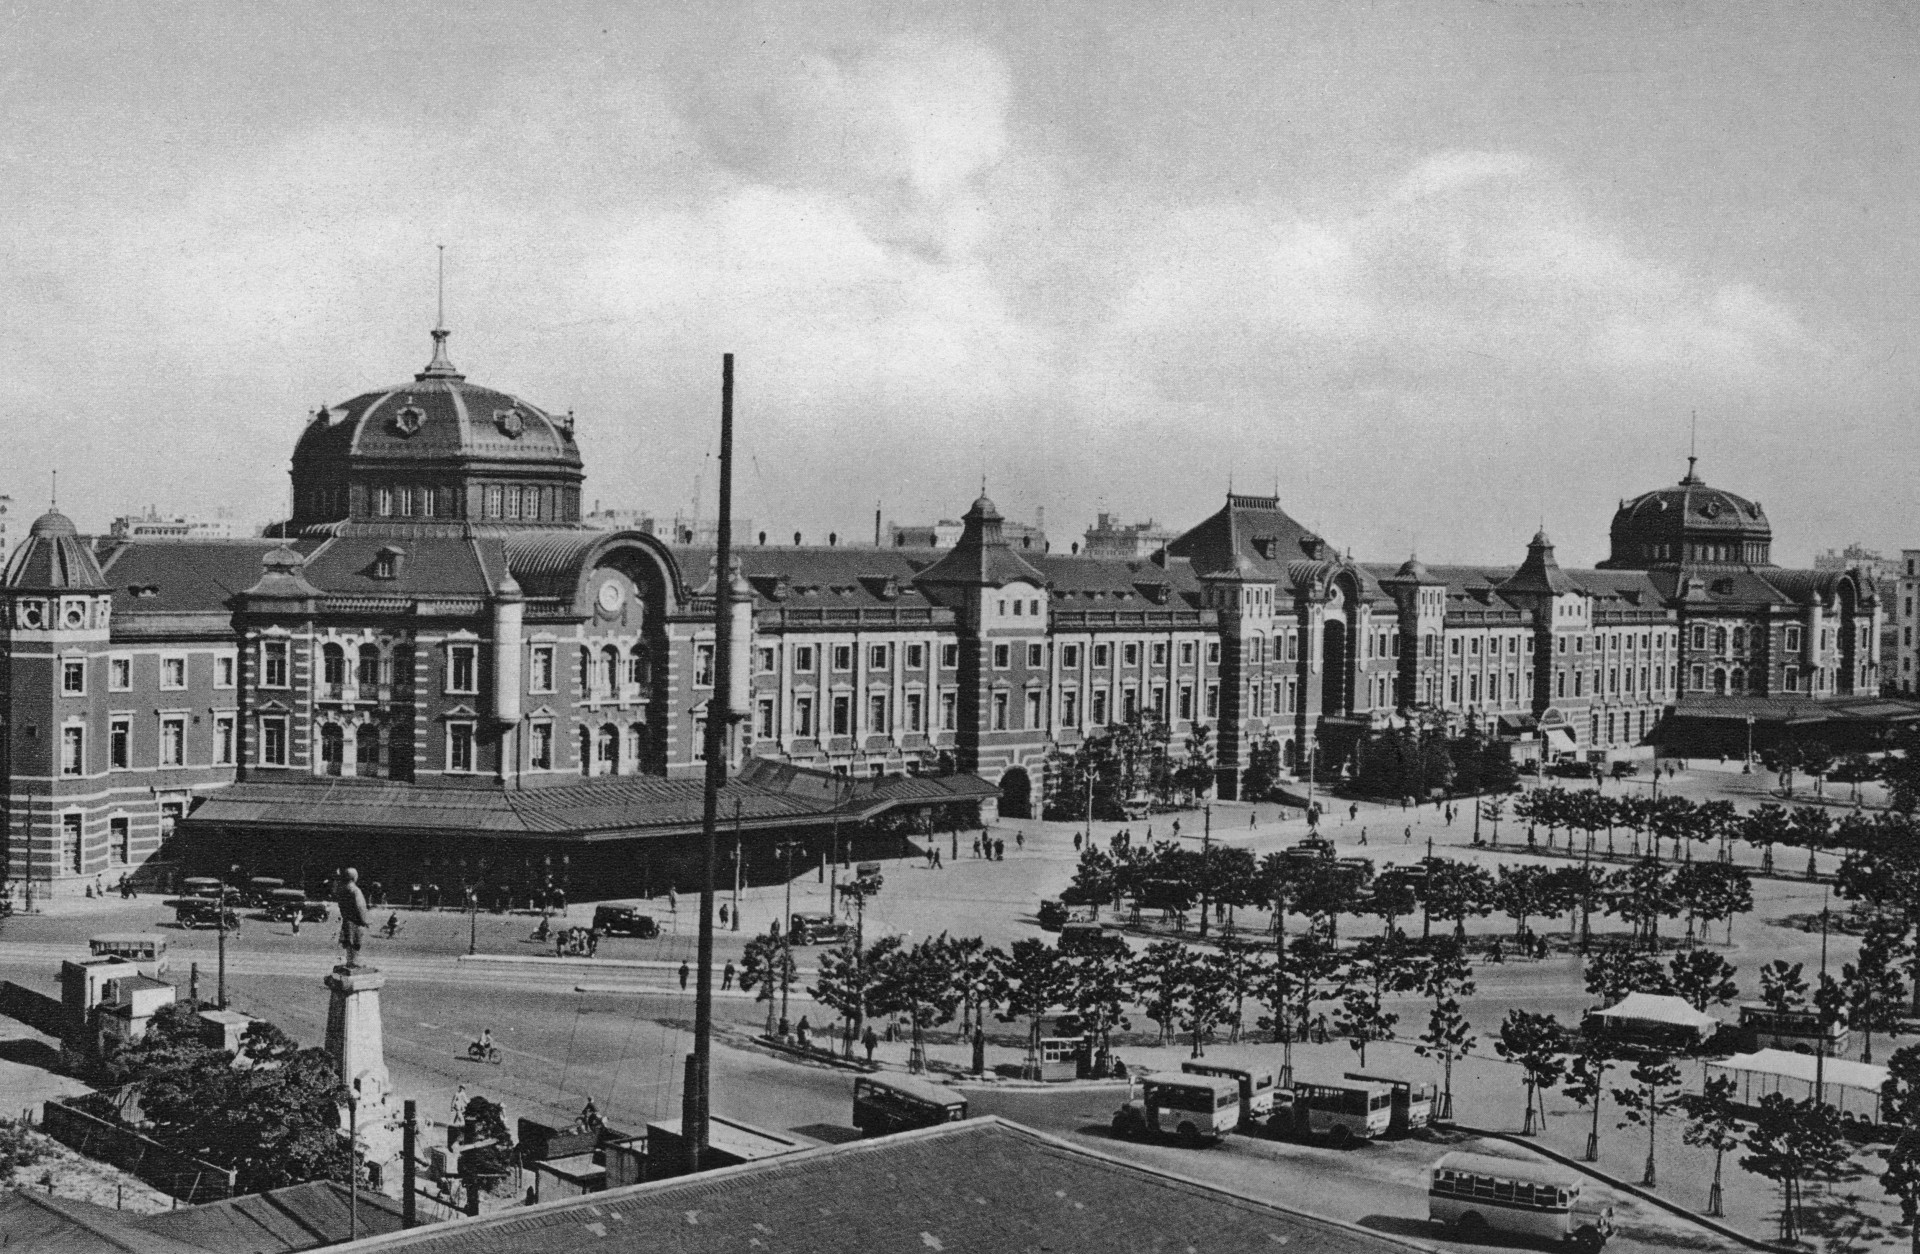 Tokyo station in 1920. At the time it was one of the city's most imposing buildings.<p><a href="https://www.msn.com/en-us/community/channel/vid-7xx8mnucu55yw63we9va2gwr7uihbxwc68fxqp25x6tg4ftibpra?cvid=94631541bc0f4f89bfd59158d696ad7e">Follow us and access great exclusive content every day</a></p>